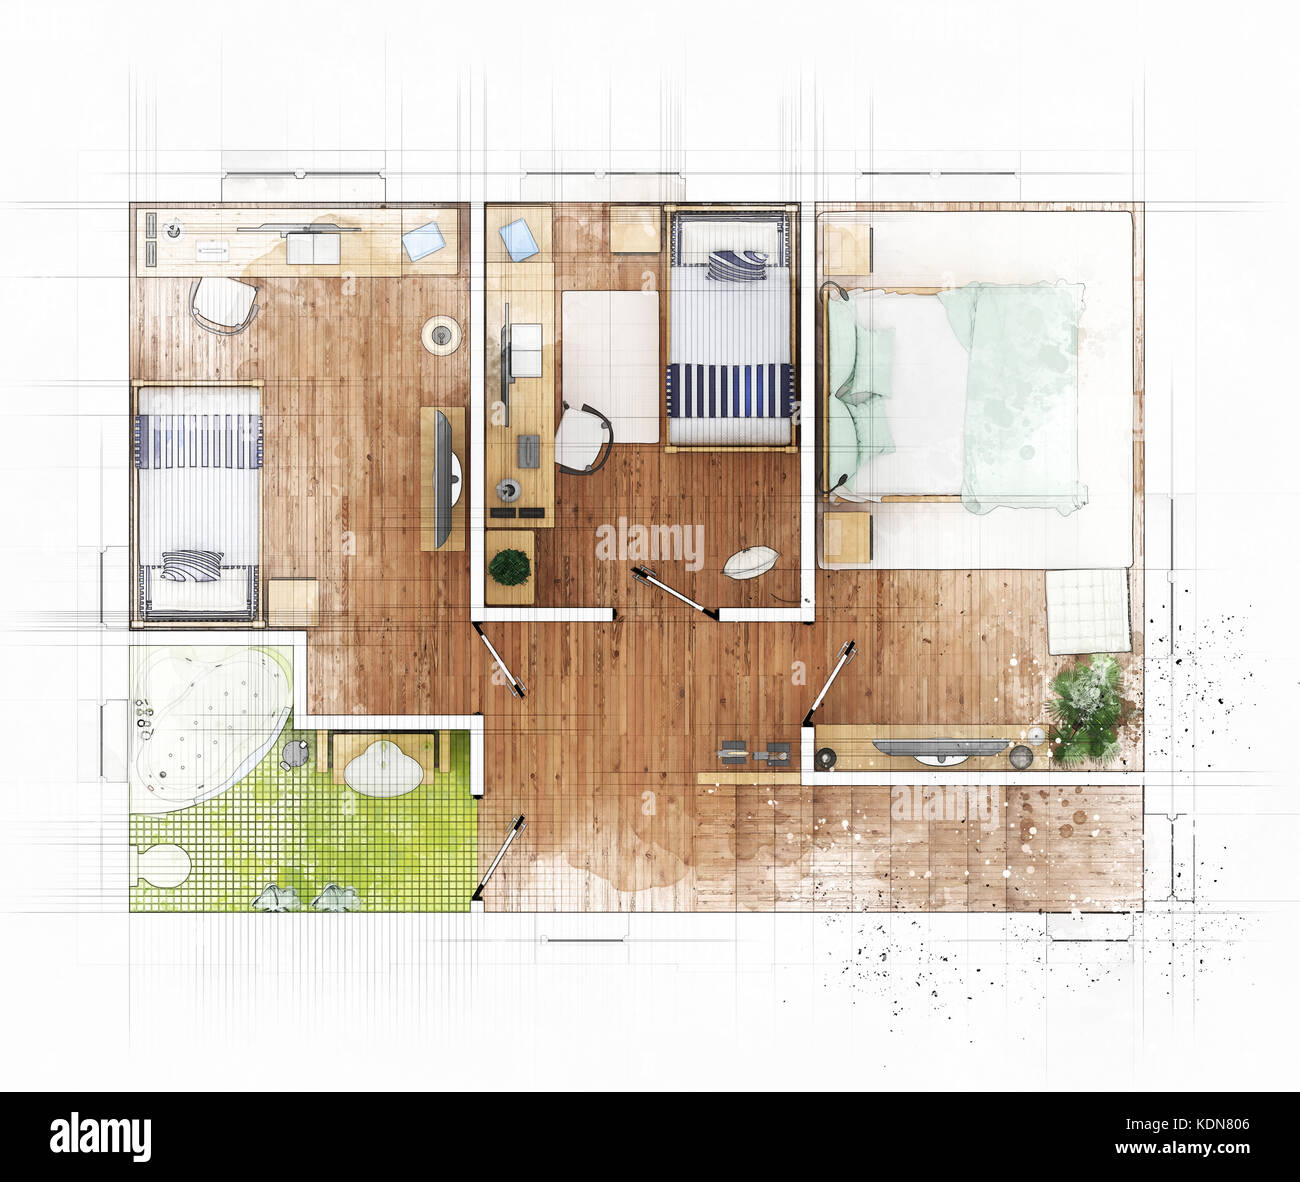 3D Floor Plan for Airbnb property based on hand sketch on Behance